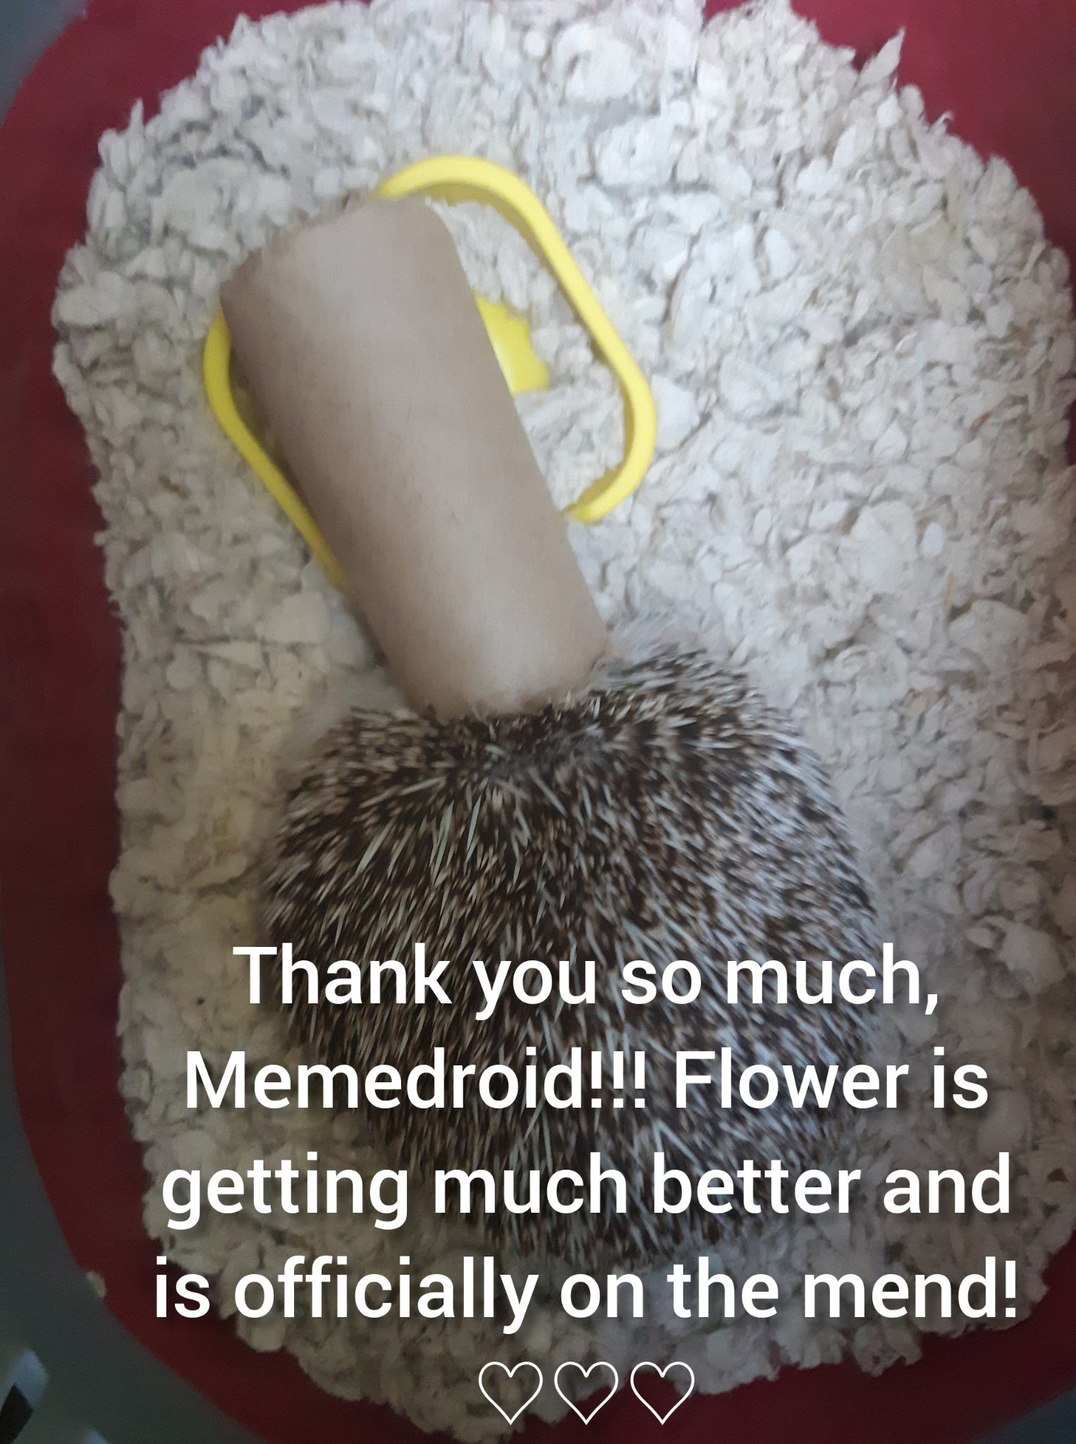 Flower is getting so much better! Her appointment went well and she has been bravely taking her medication! - meme